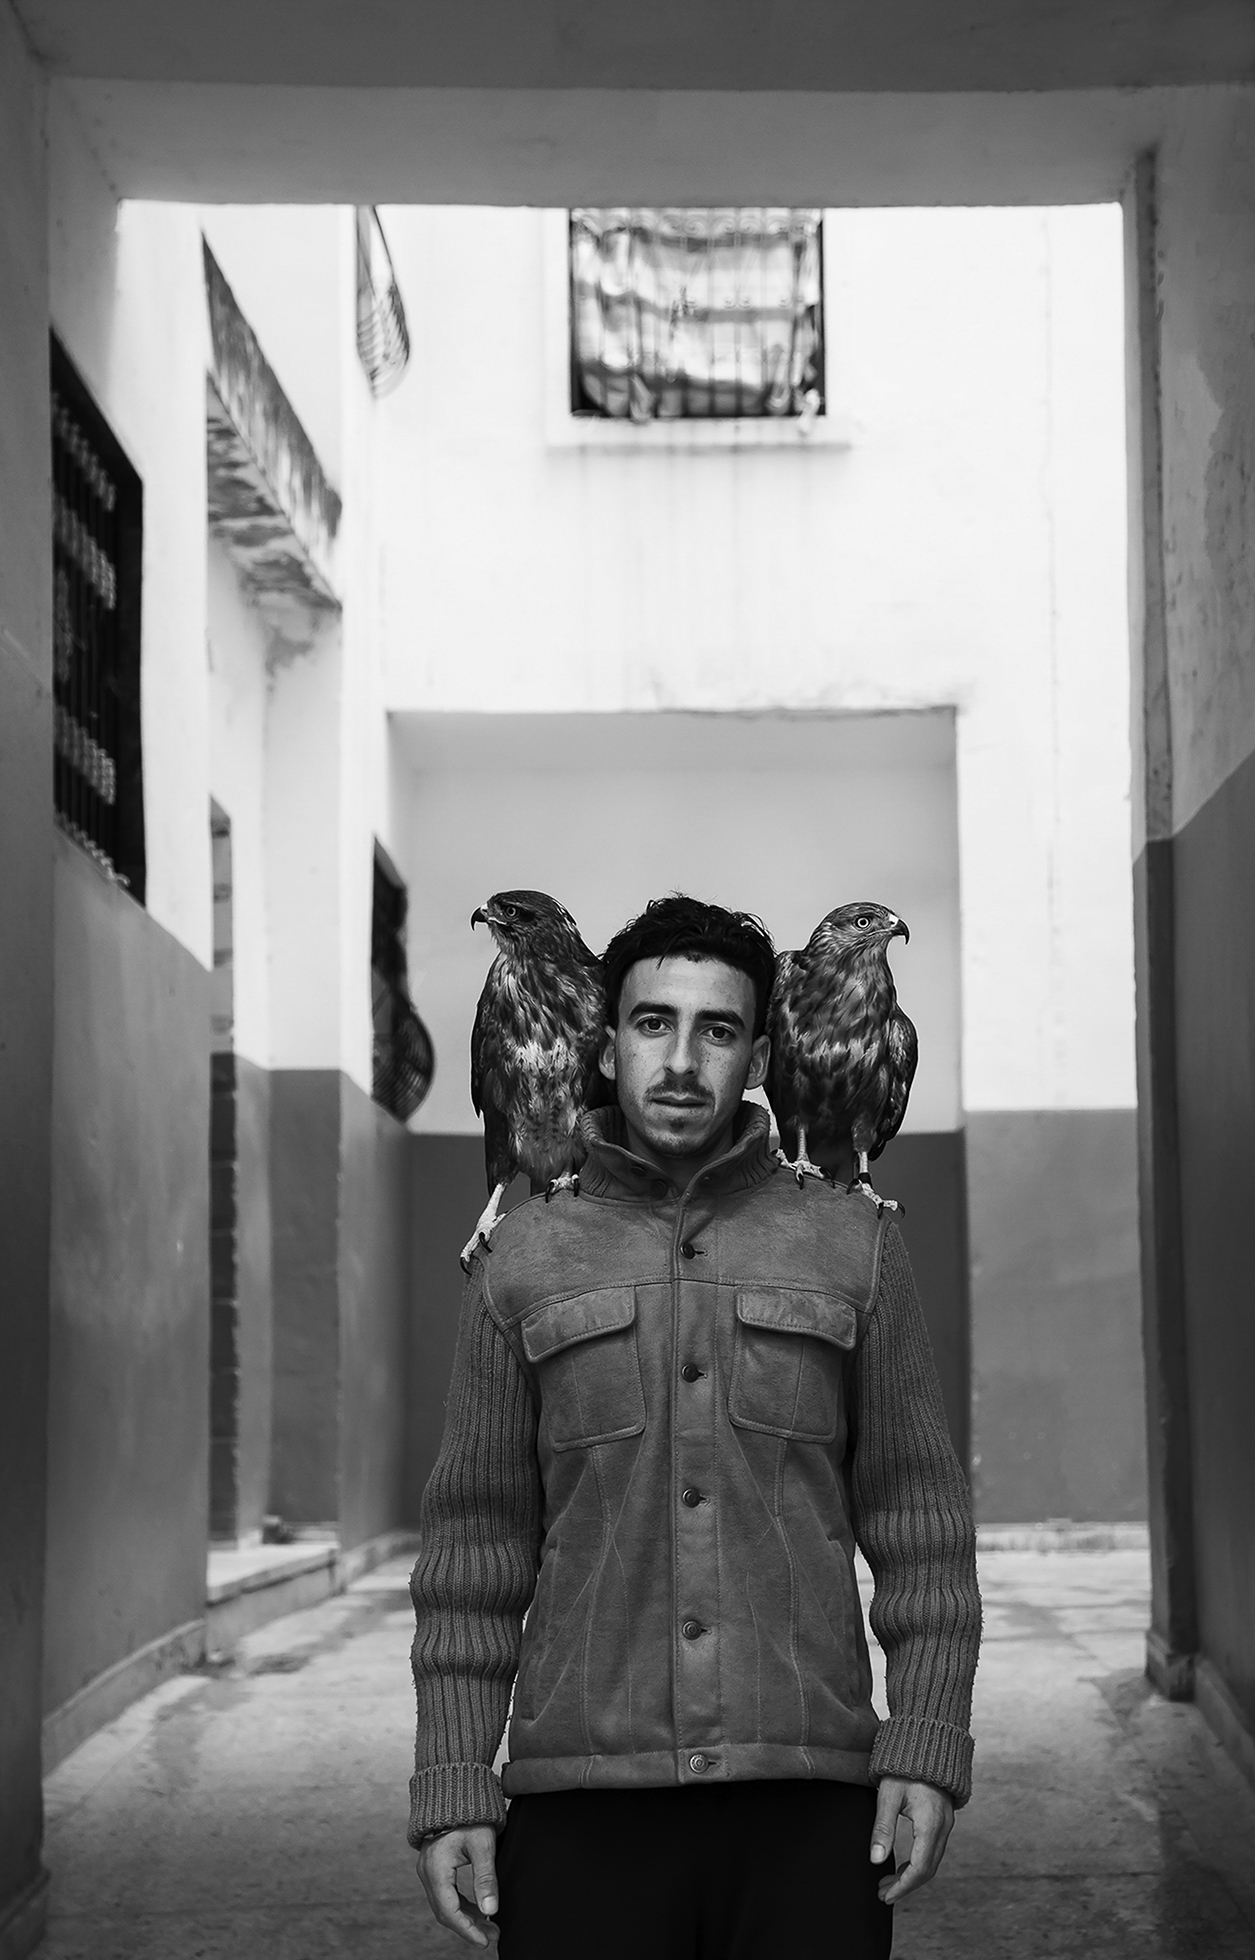 A falconer near his home in Tangier, Morocco, is wearing a long-sleeved jacket as he stands looking at the camera with a falcon perched on each shoulder: Diablo and Paco are each looking off to their respective side.